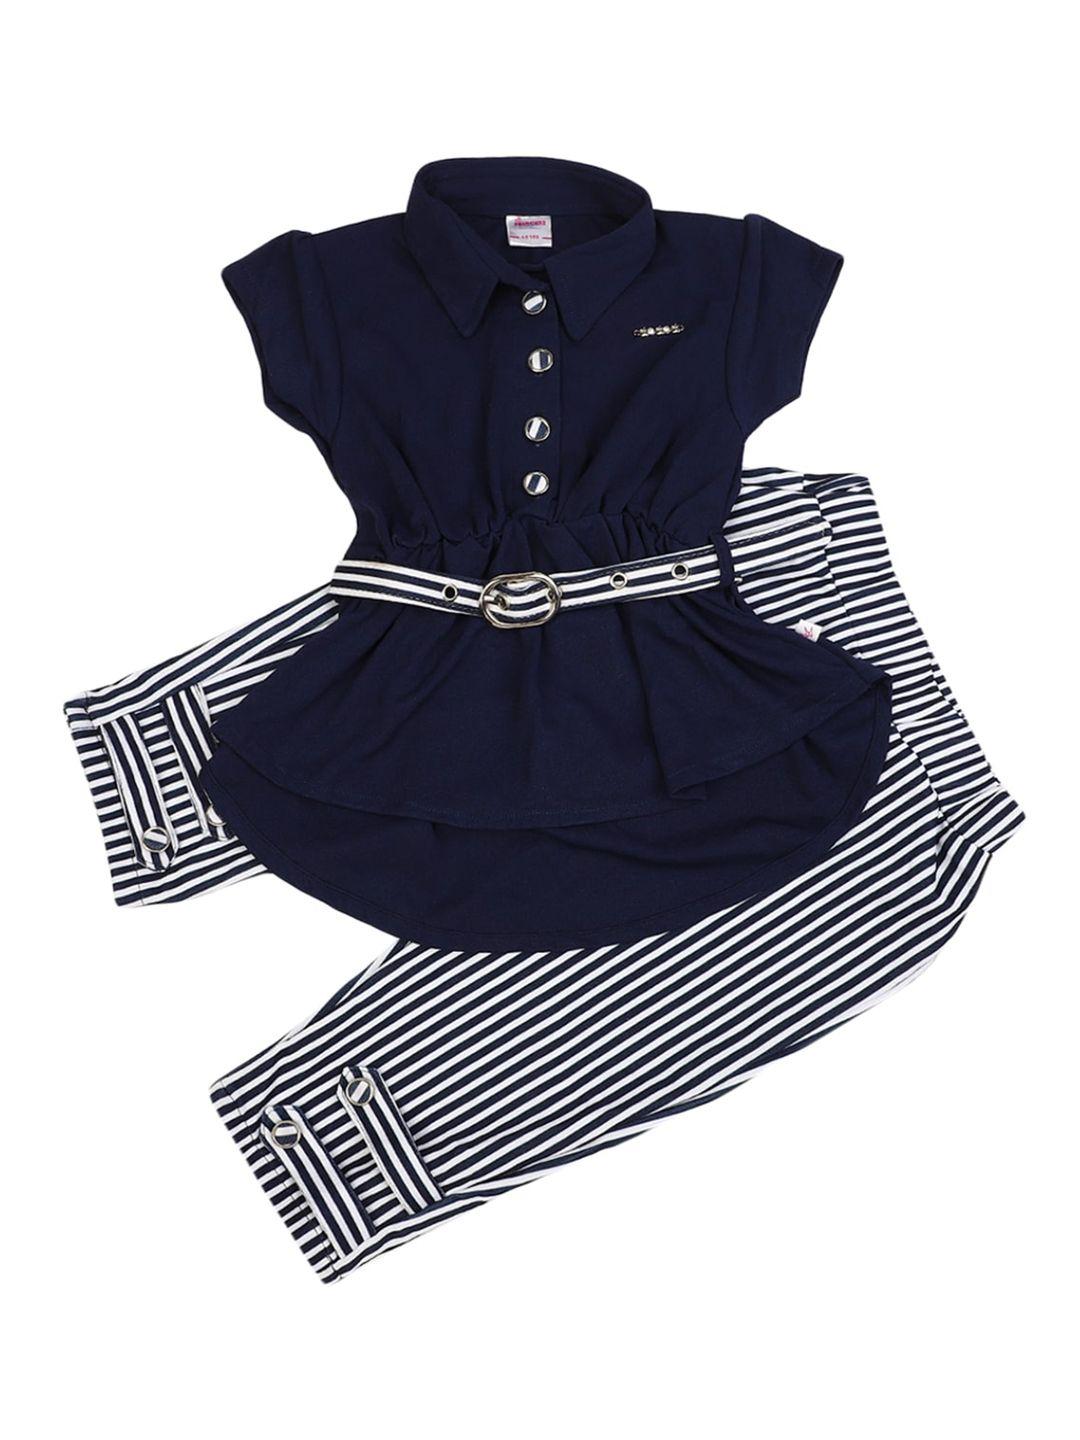 v-mart-unisex-kids-navy-blue-&-white-printed-top-with-shorts